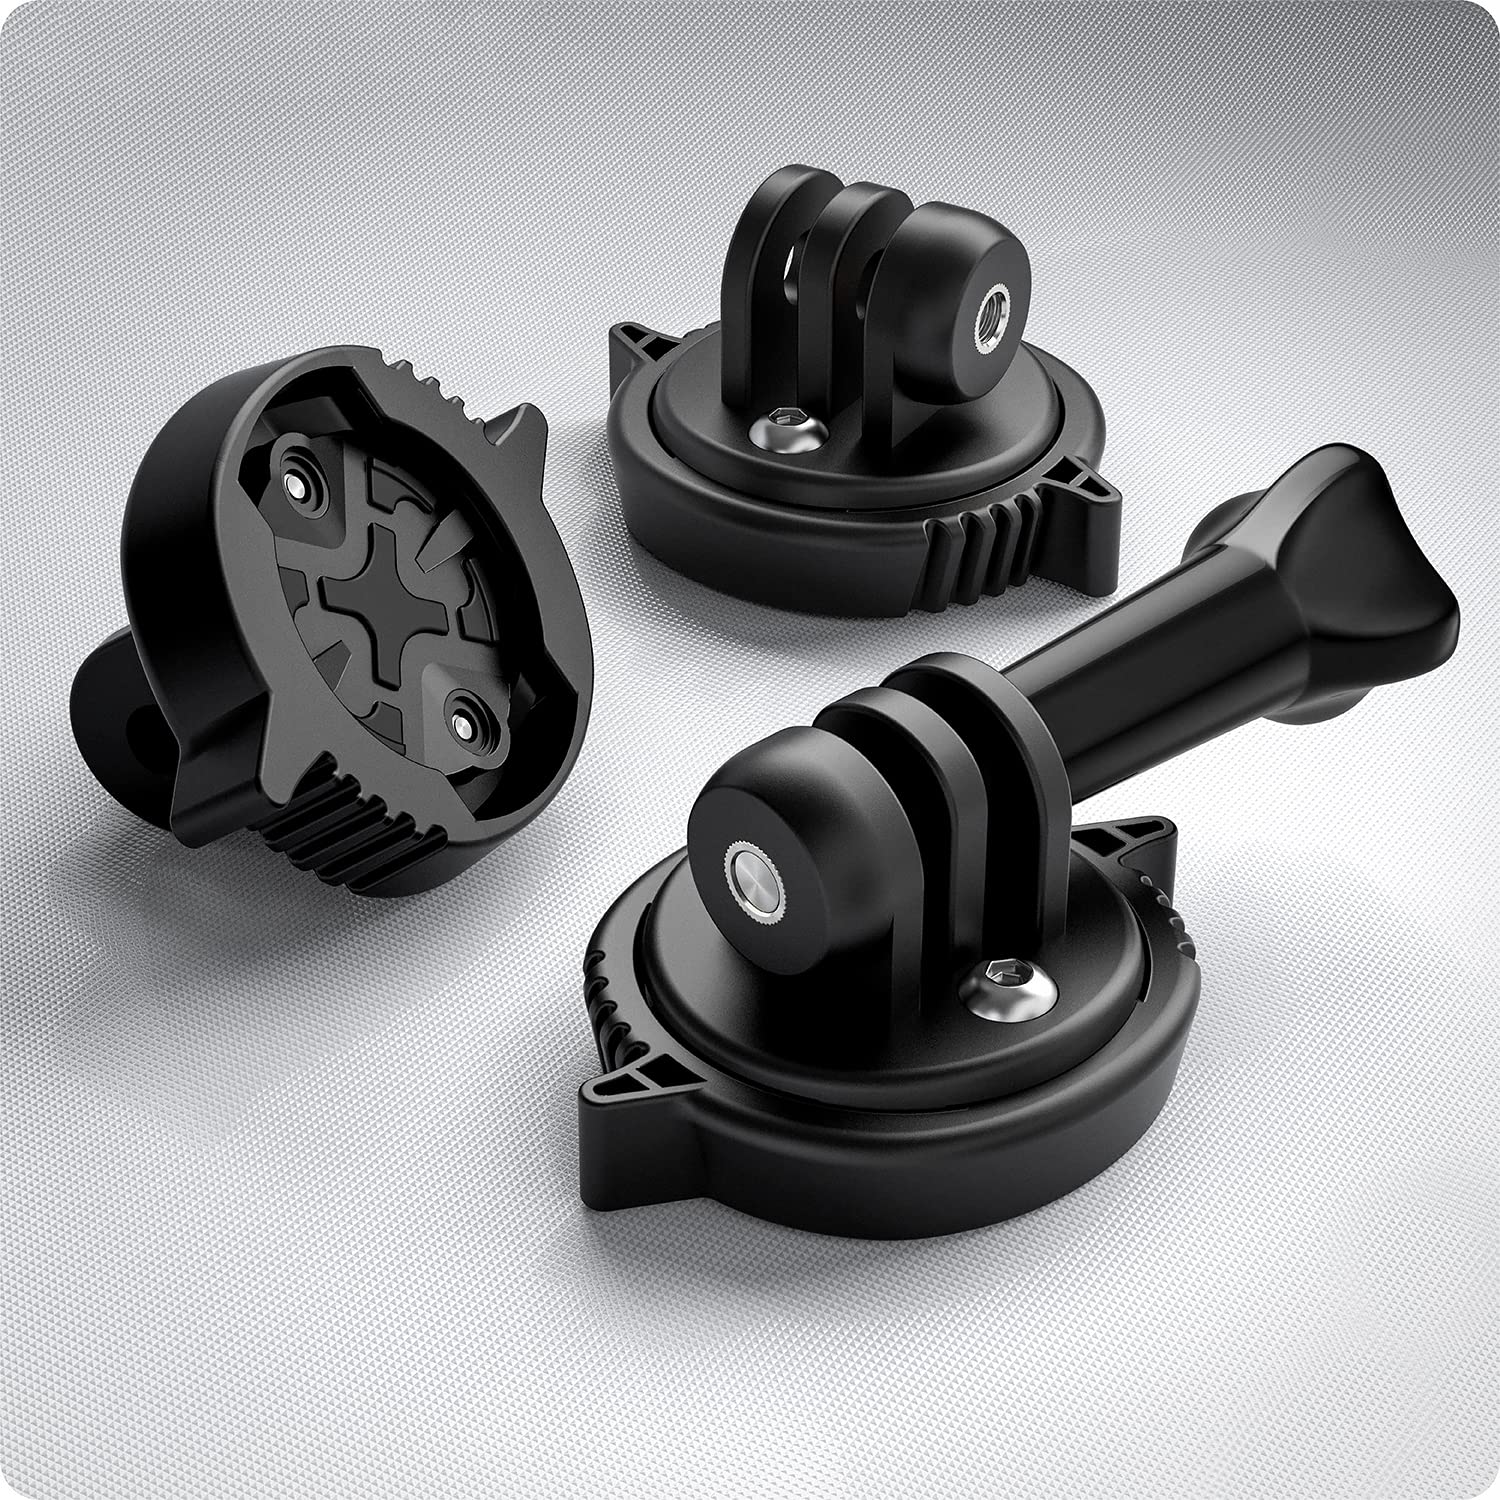 TUSITA Quarter-Turn to Friction Flange Mount Adapter - Compatible with Garmin Flush Out-Front Mount